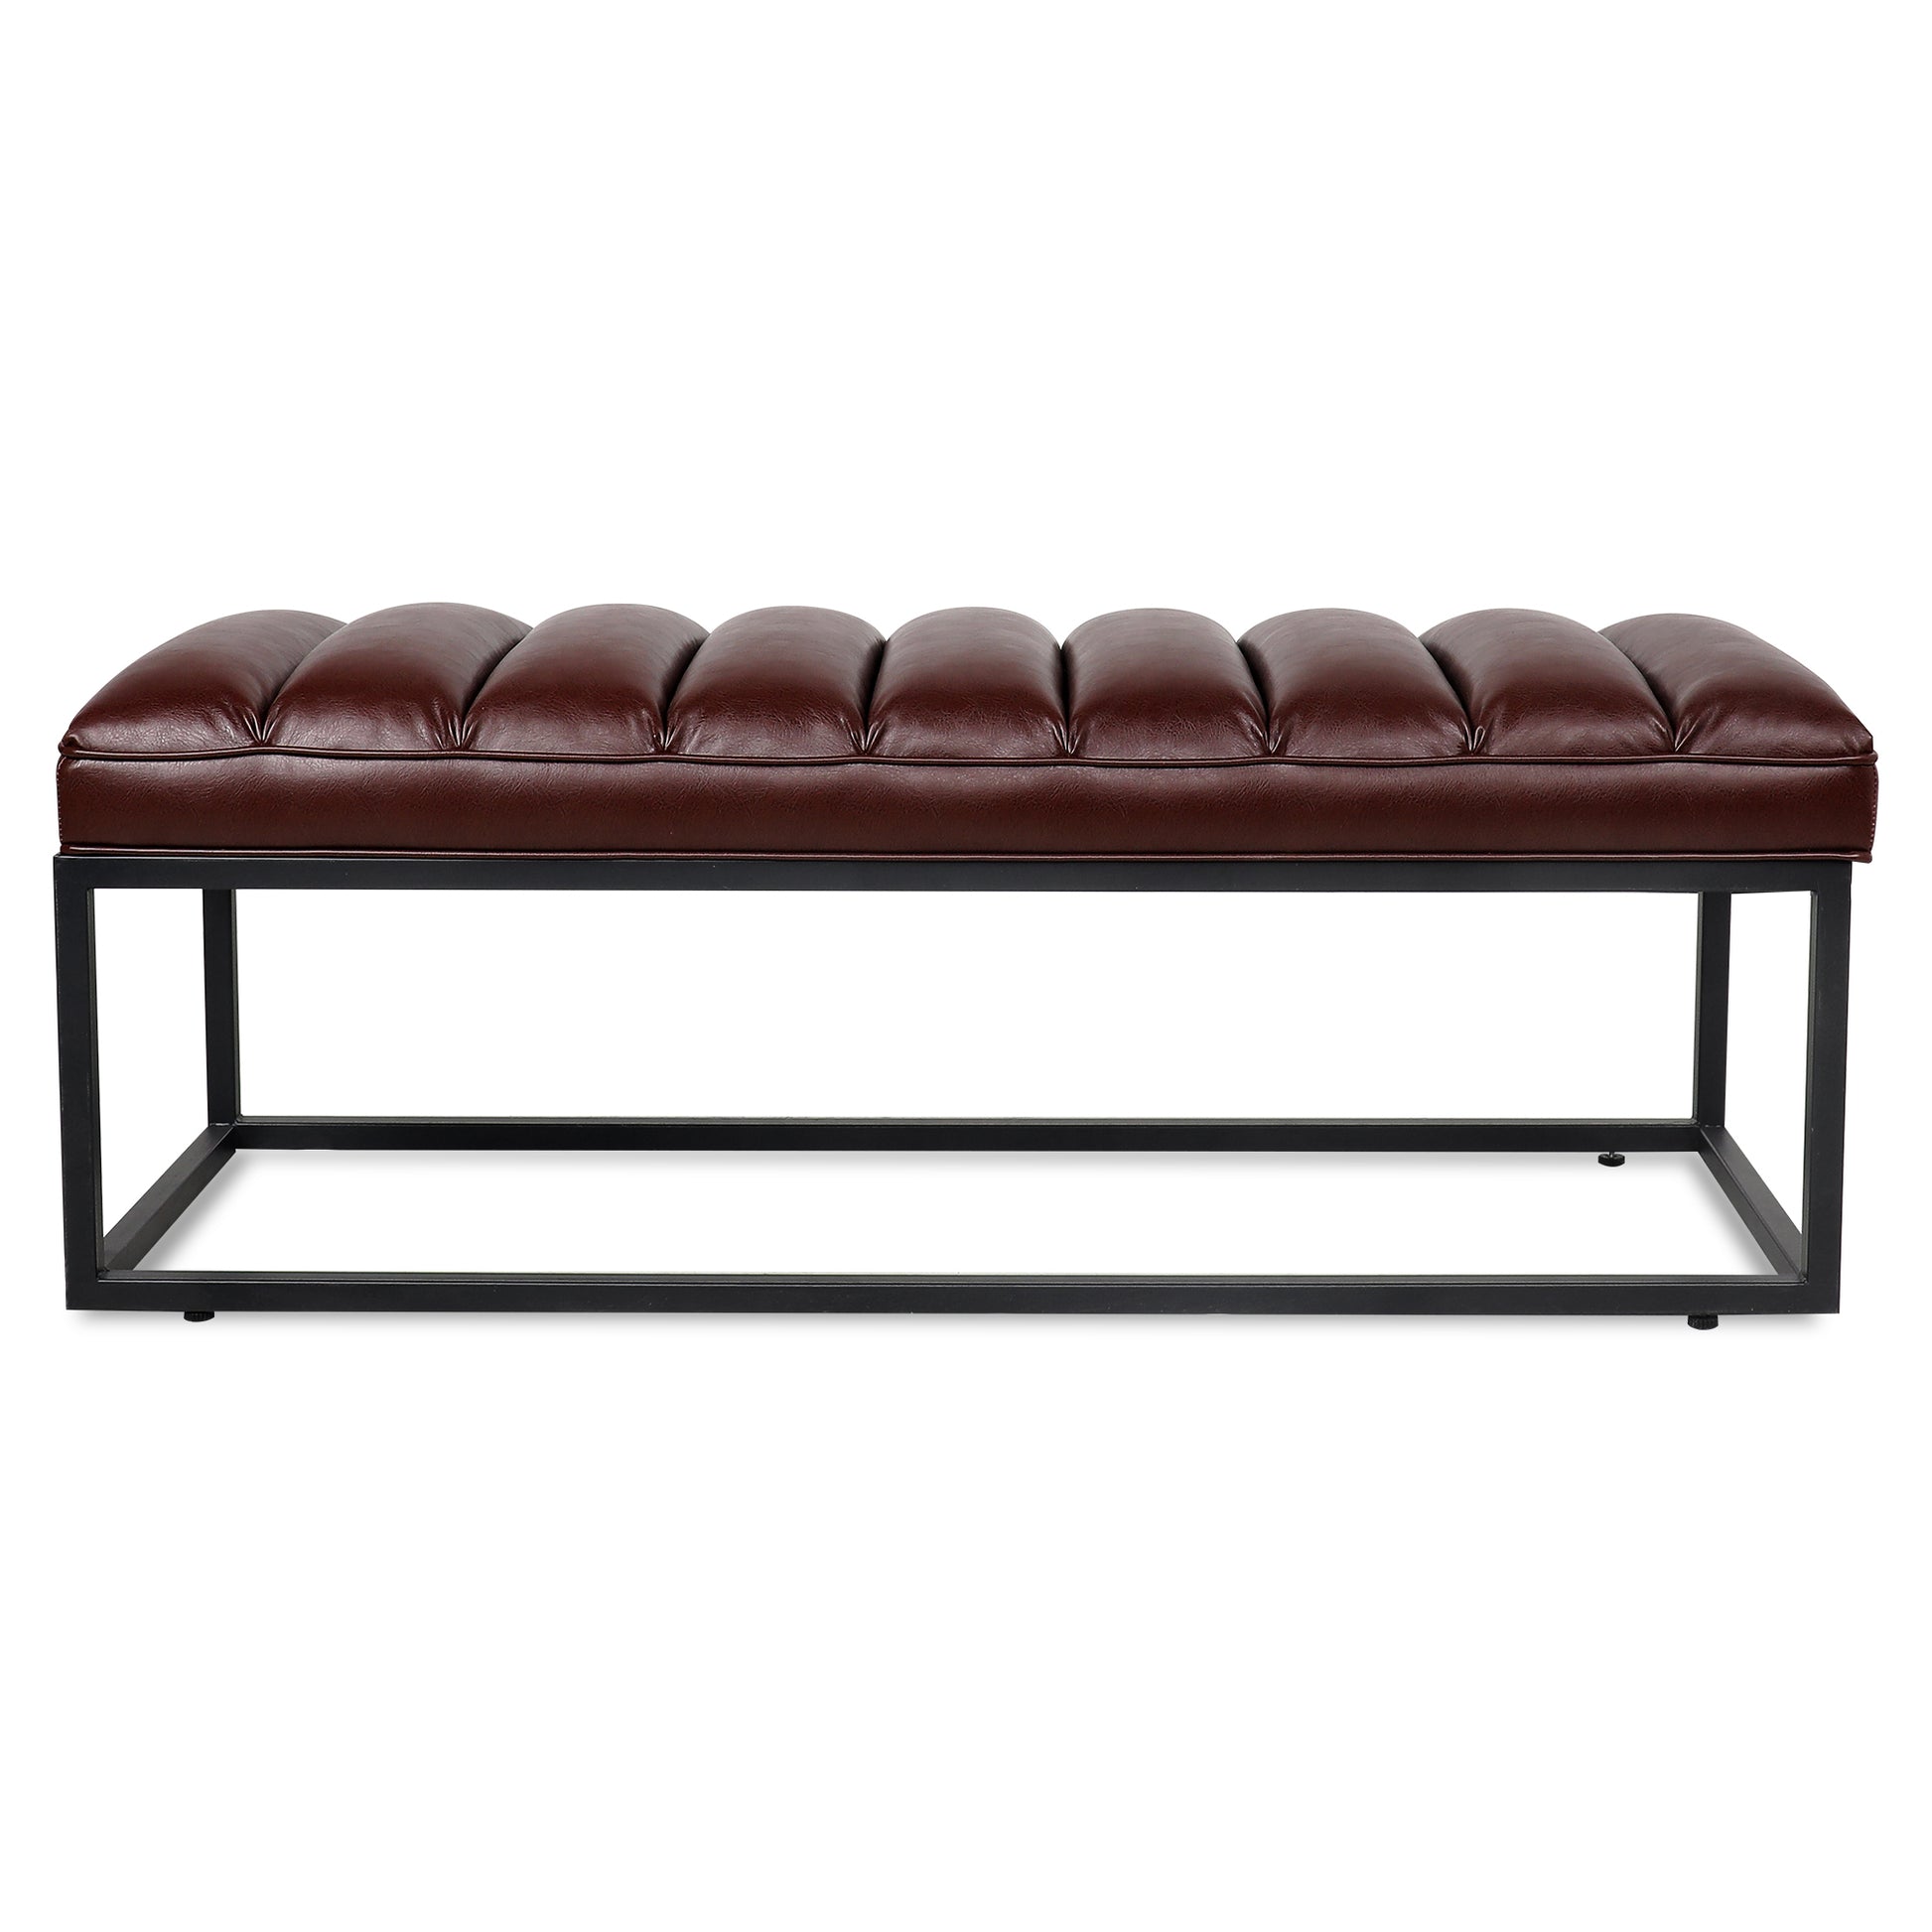 Metal Base Upholstered Bench for Bedroom for Entryway dark brown-pu